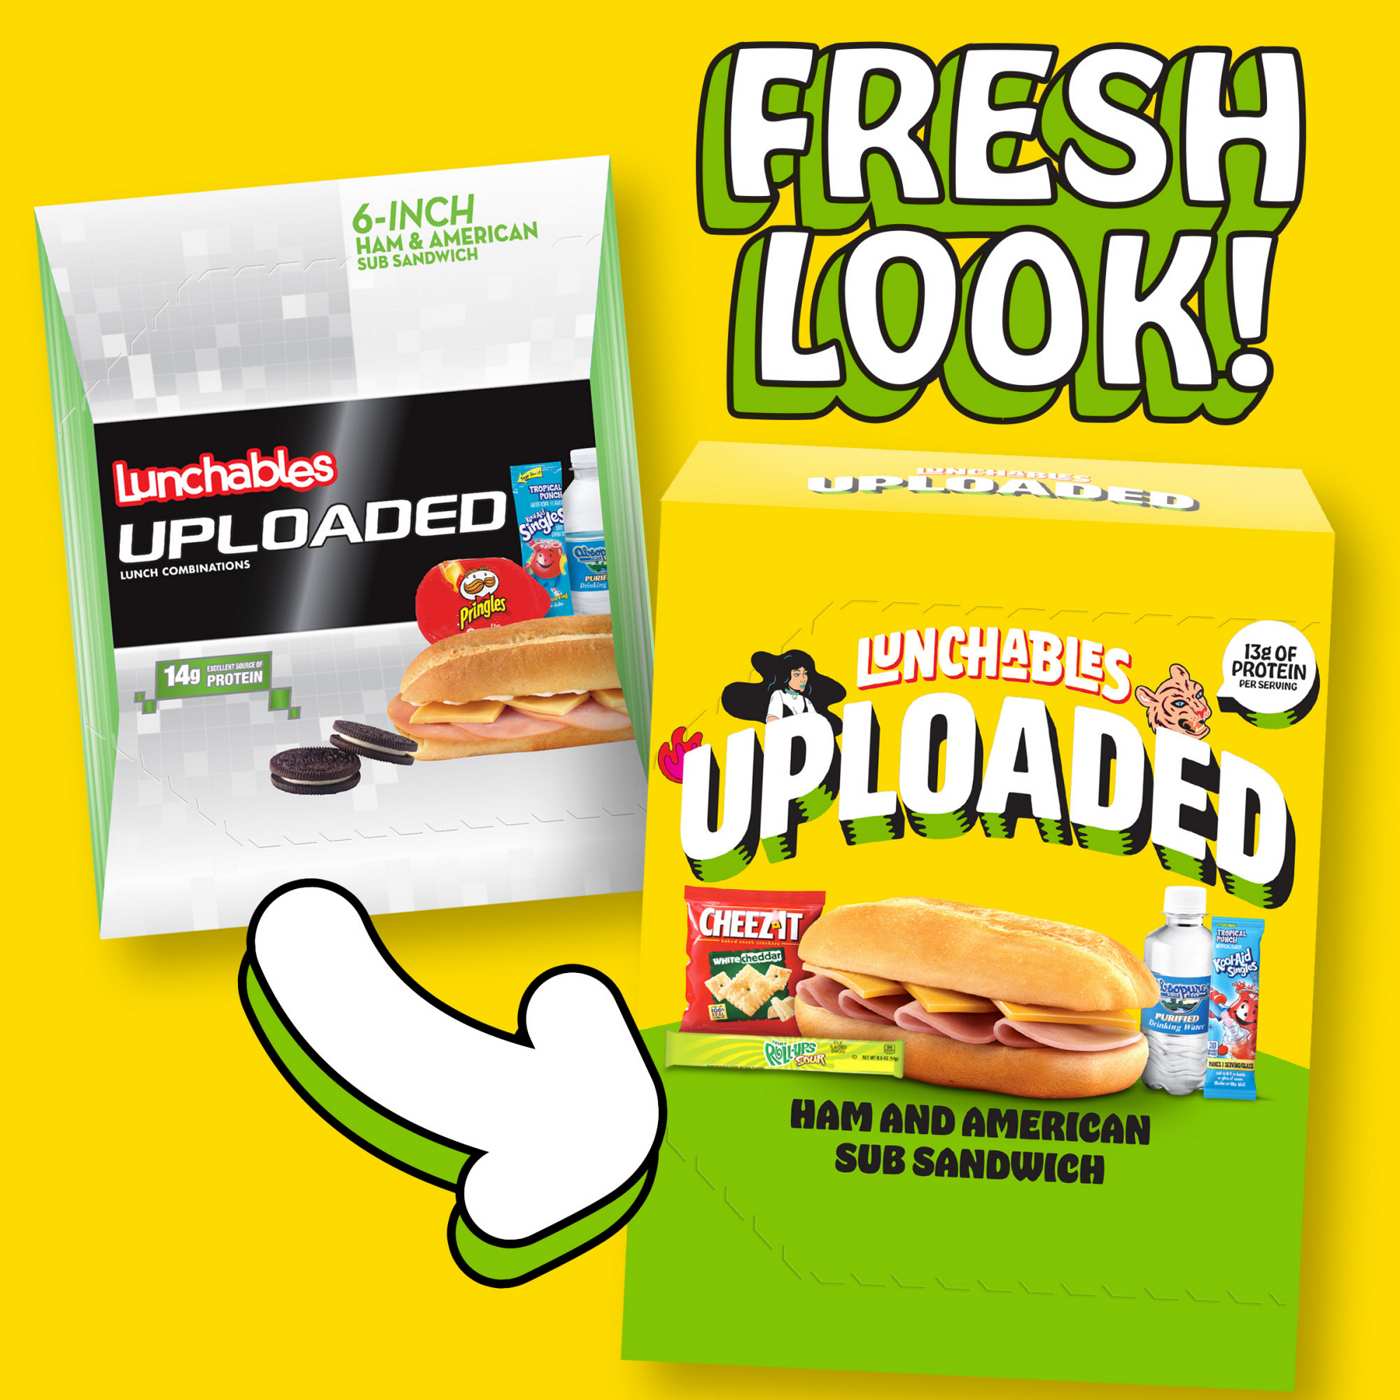 Lunchables Uploaded Meal Kit - Ham & American Sub Sandwich; image 2 of 5